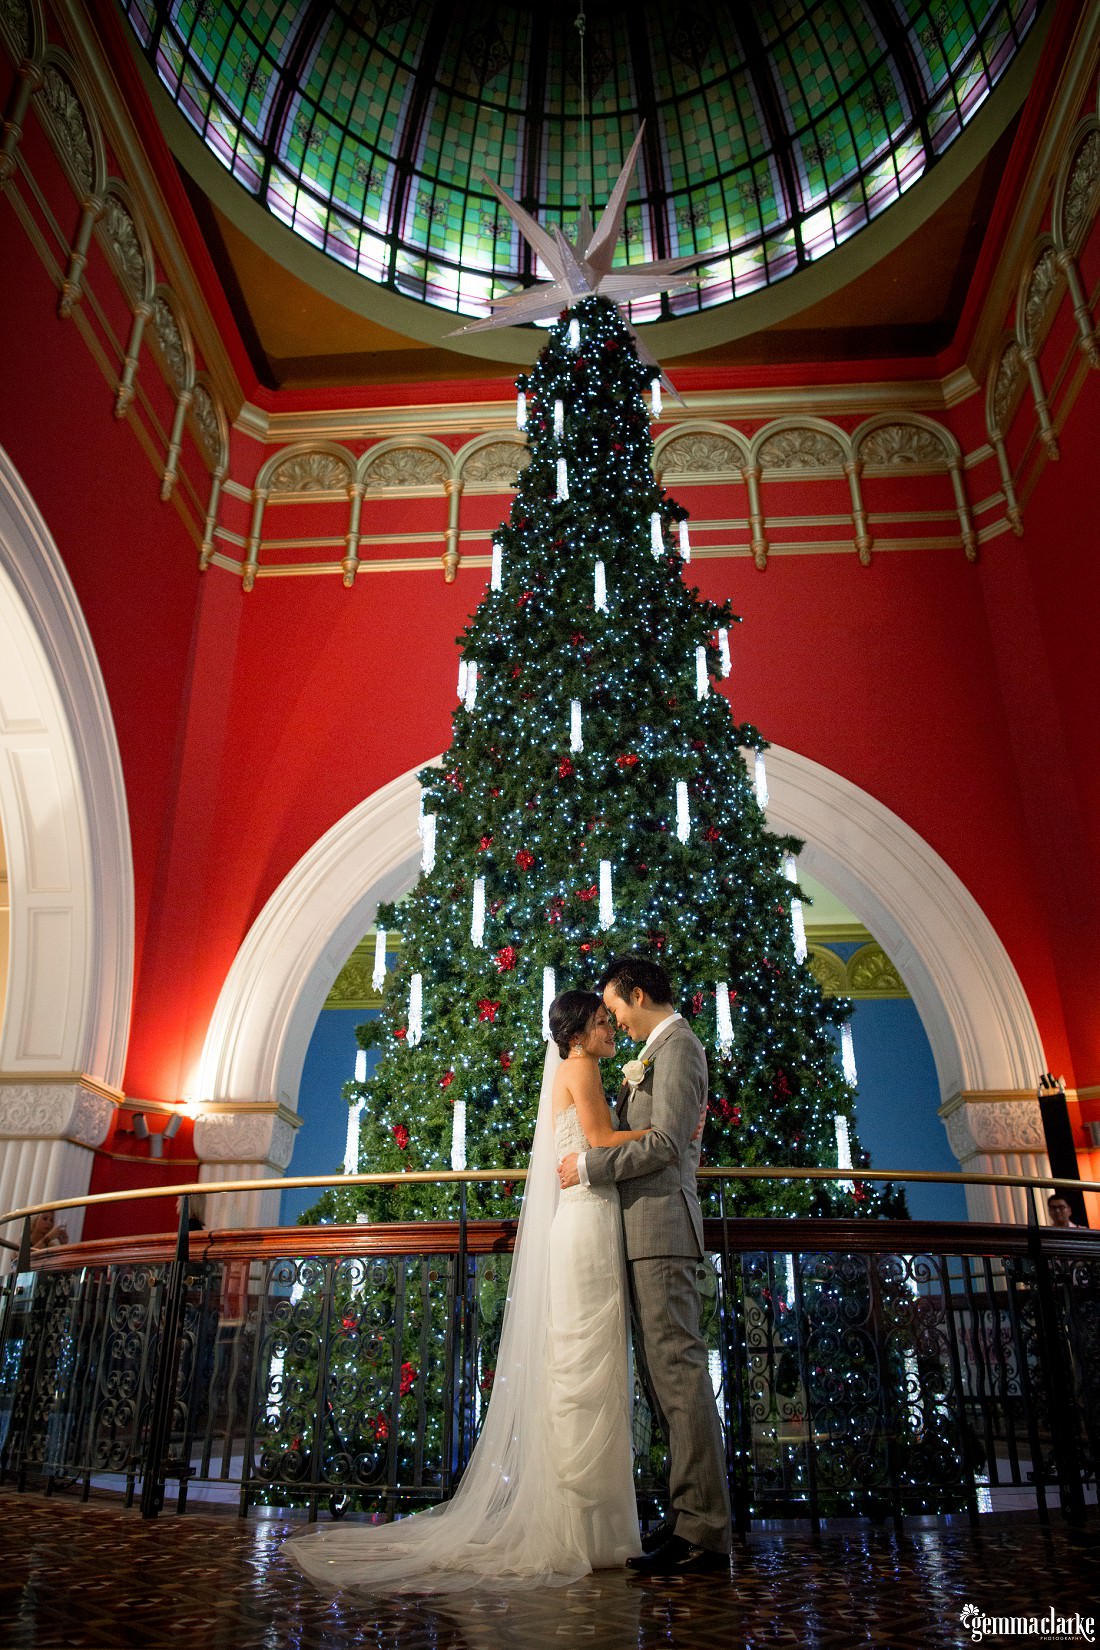 A bride and groom holding each other close in front of a large Christmas Tree in the Queen Victoria Building in Sydney - Secret Garden Wedding